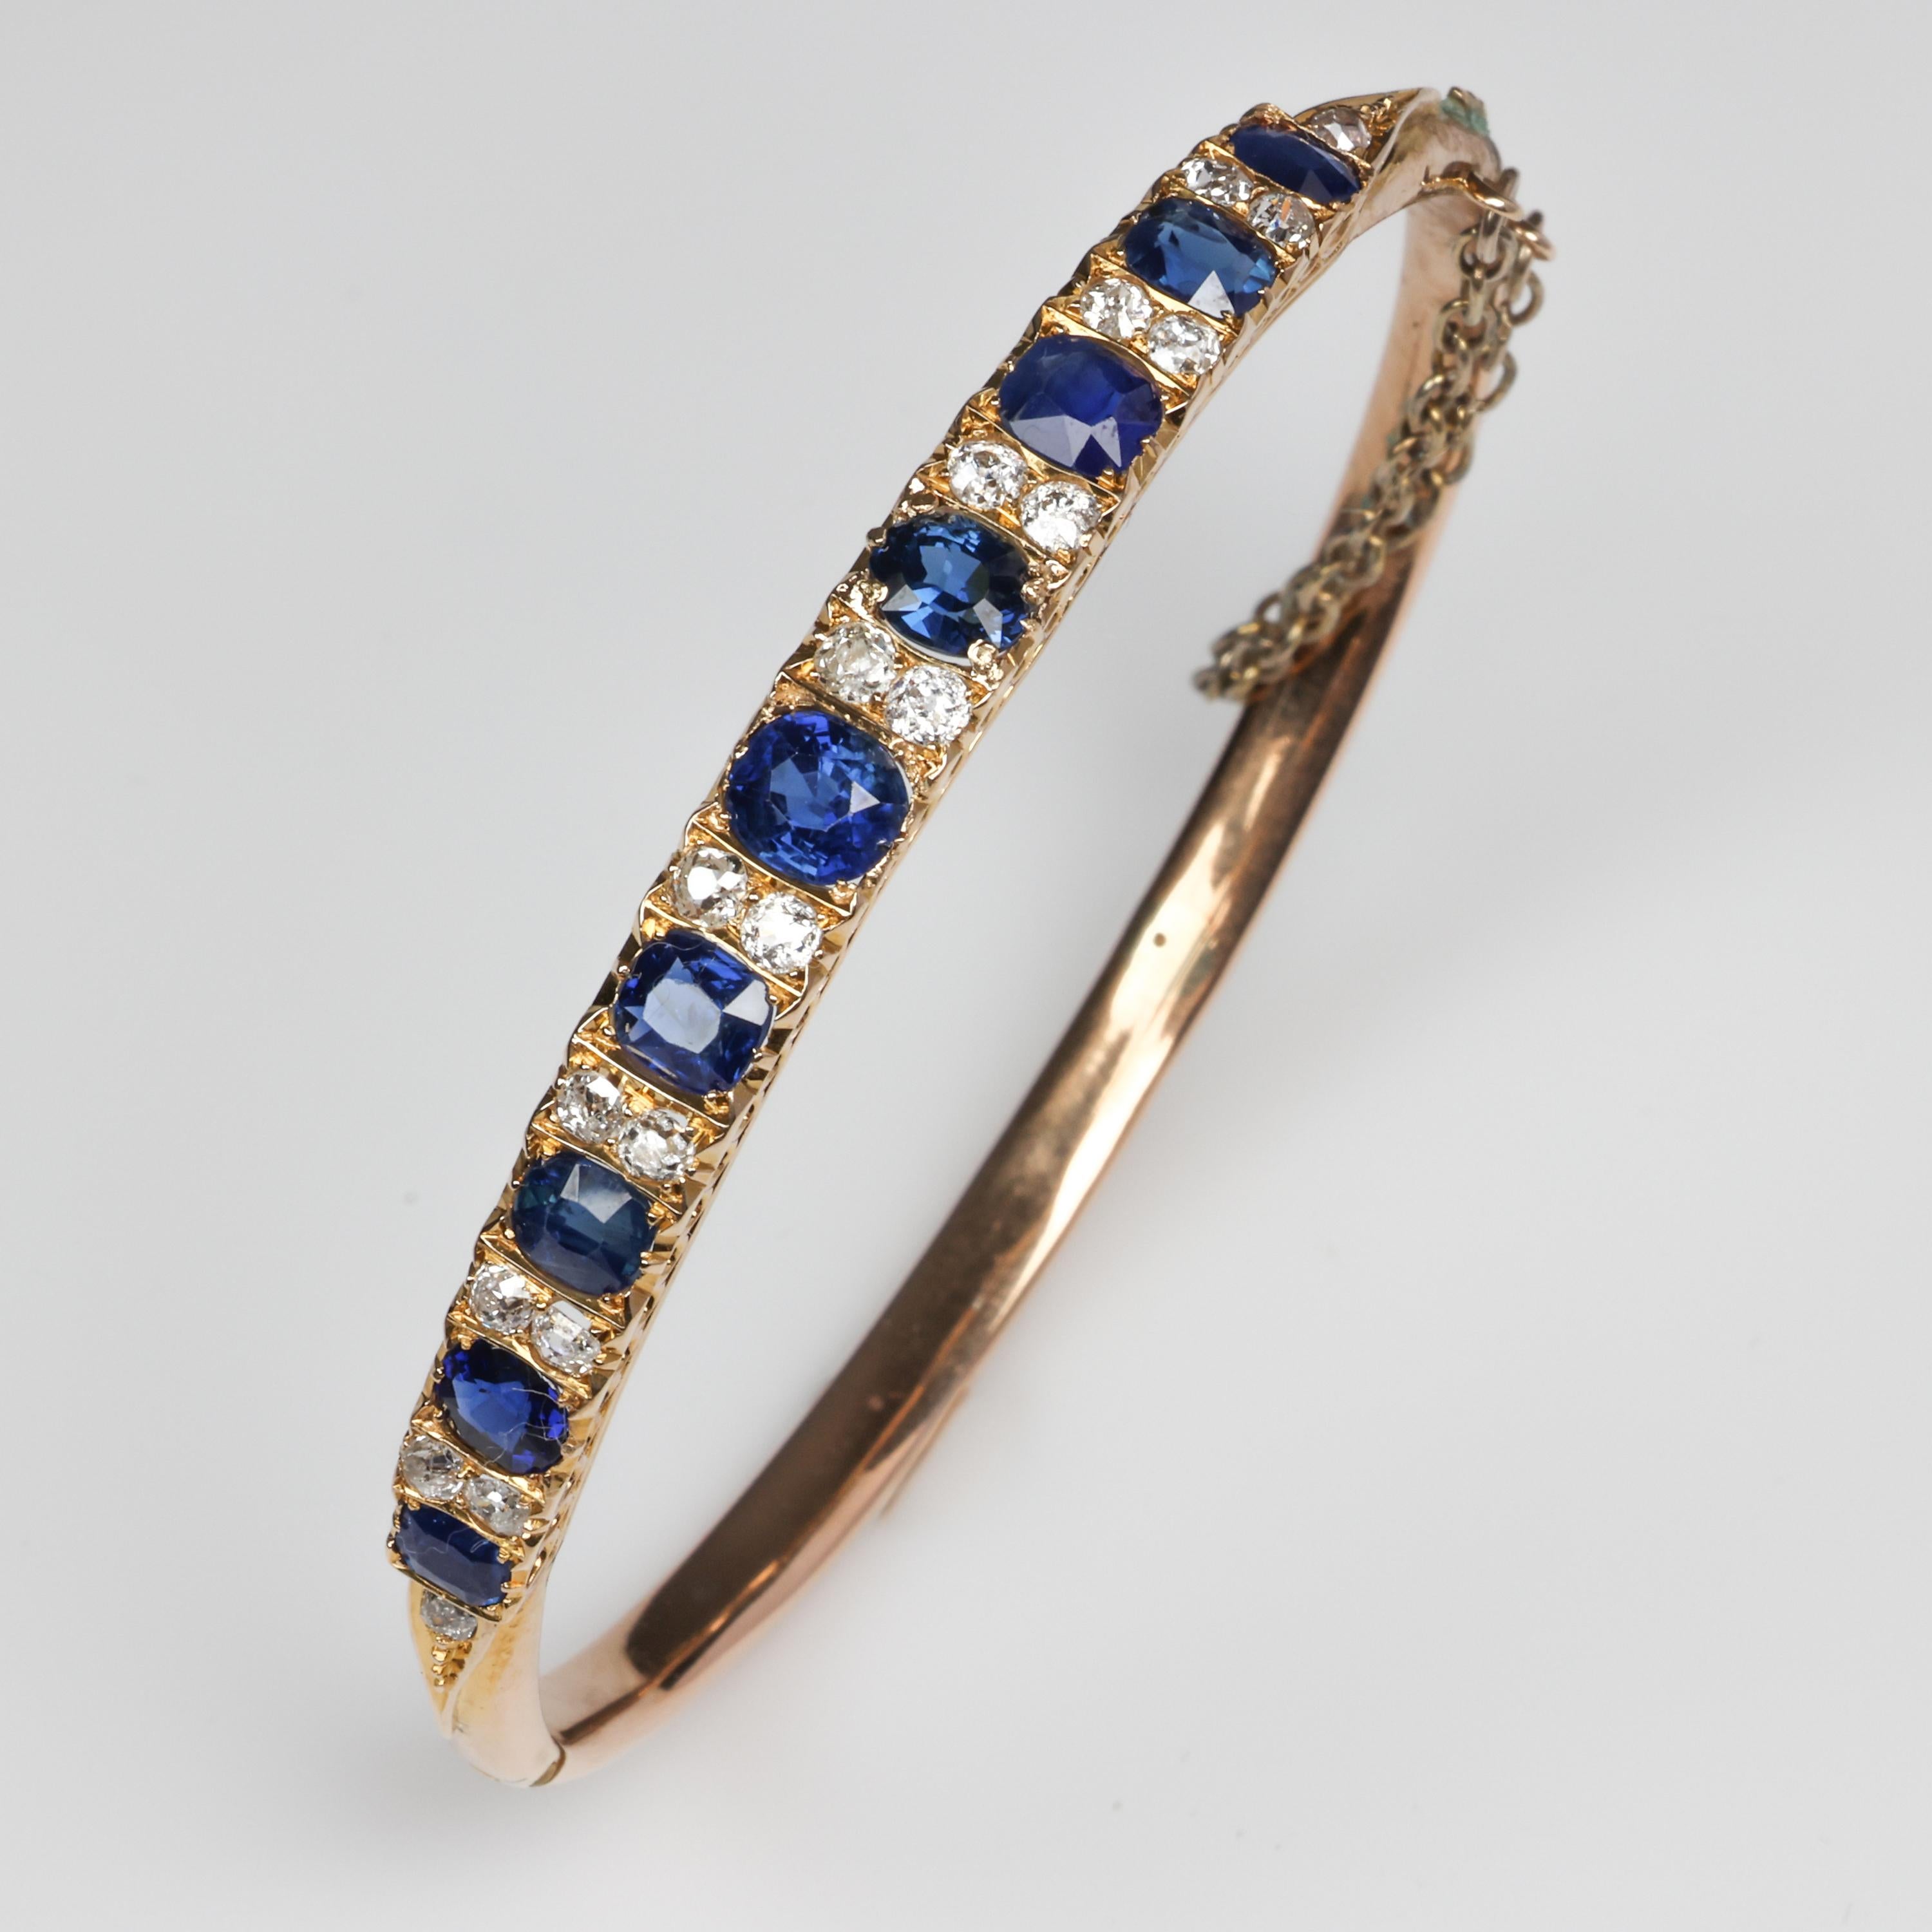 Approximately 2.78 carats of royal blue natural and untreated oval-cut Palin sapphires and about half-a-carat of bright white Ole-European cut diamonds scintillate and utterly delight from within the frame of rosy 14K gold. The interior of the